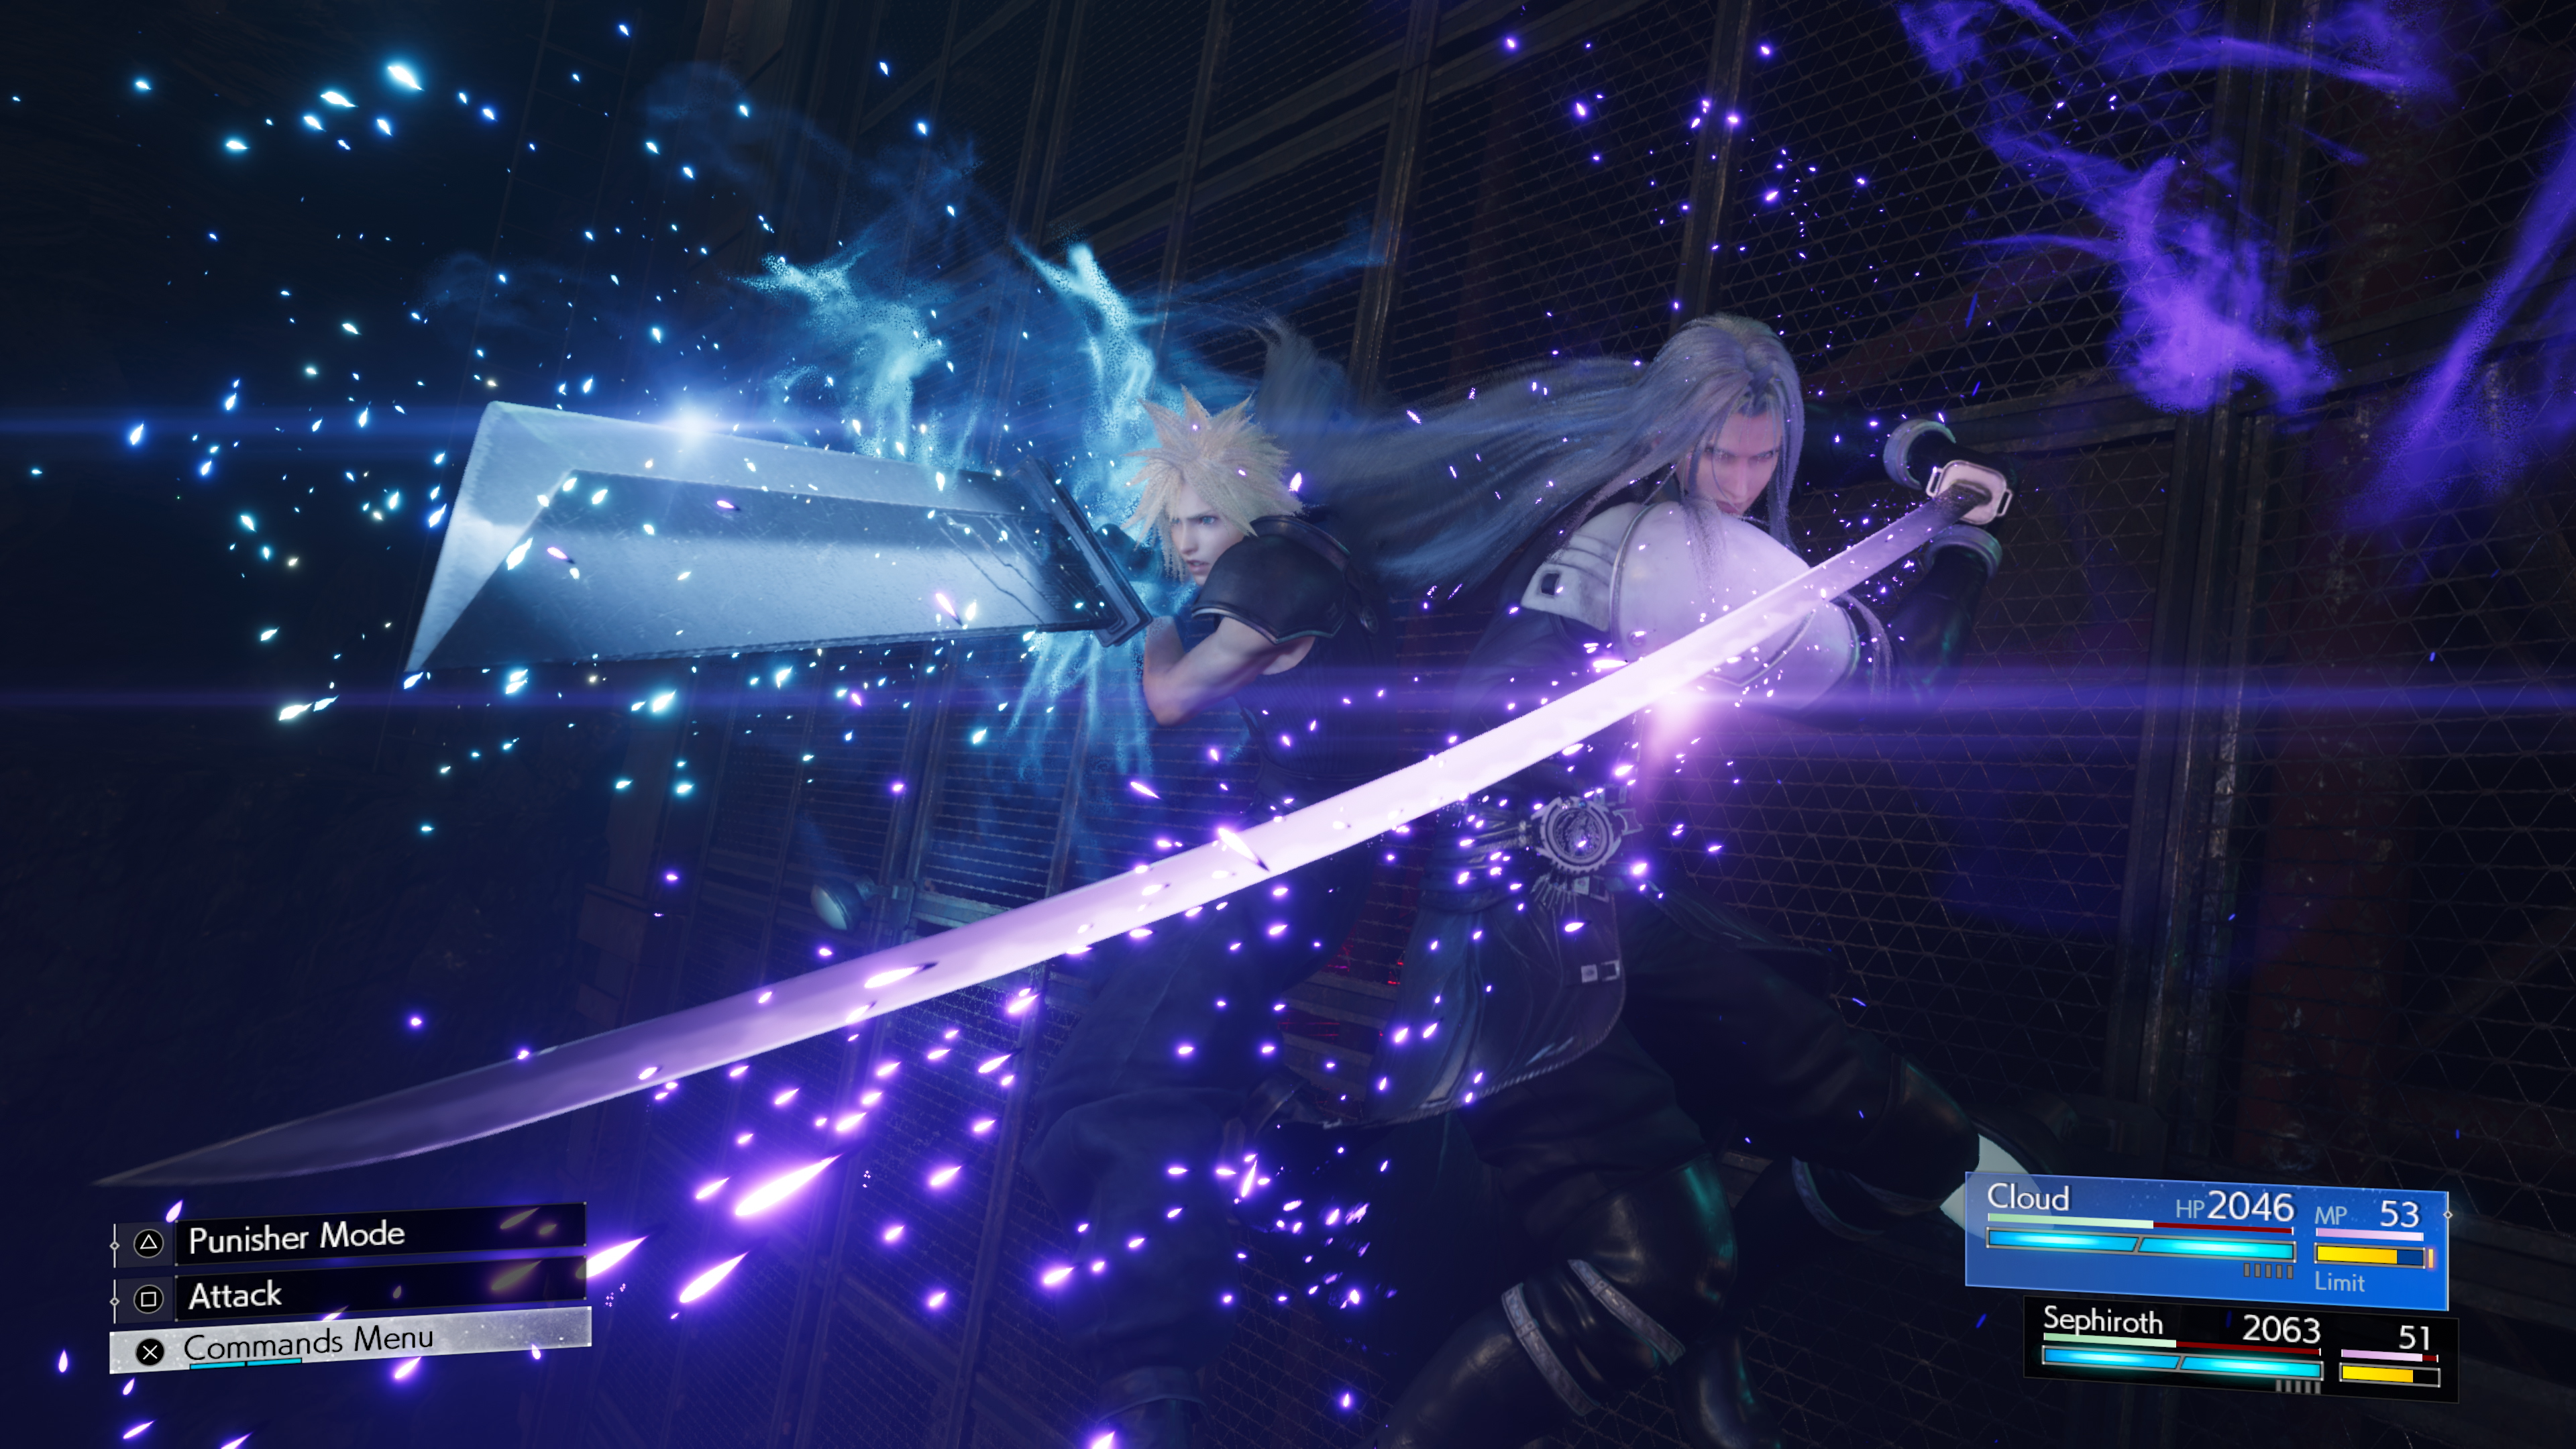 A screenshot from Final Fantasy 7 Rebirth, showing Cloud and Sephiroth back-to-back, branding their swords together. Cloud's Buster Sword is surrounded by blue light and sparks, while Sephiroth's Masamune's effects are purple.